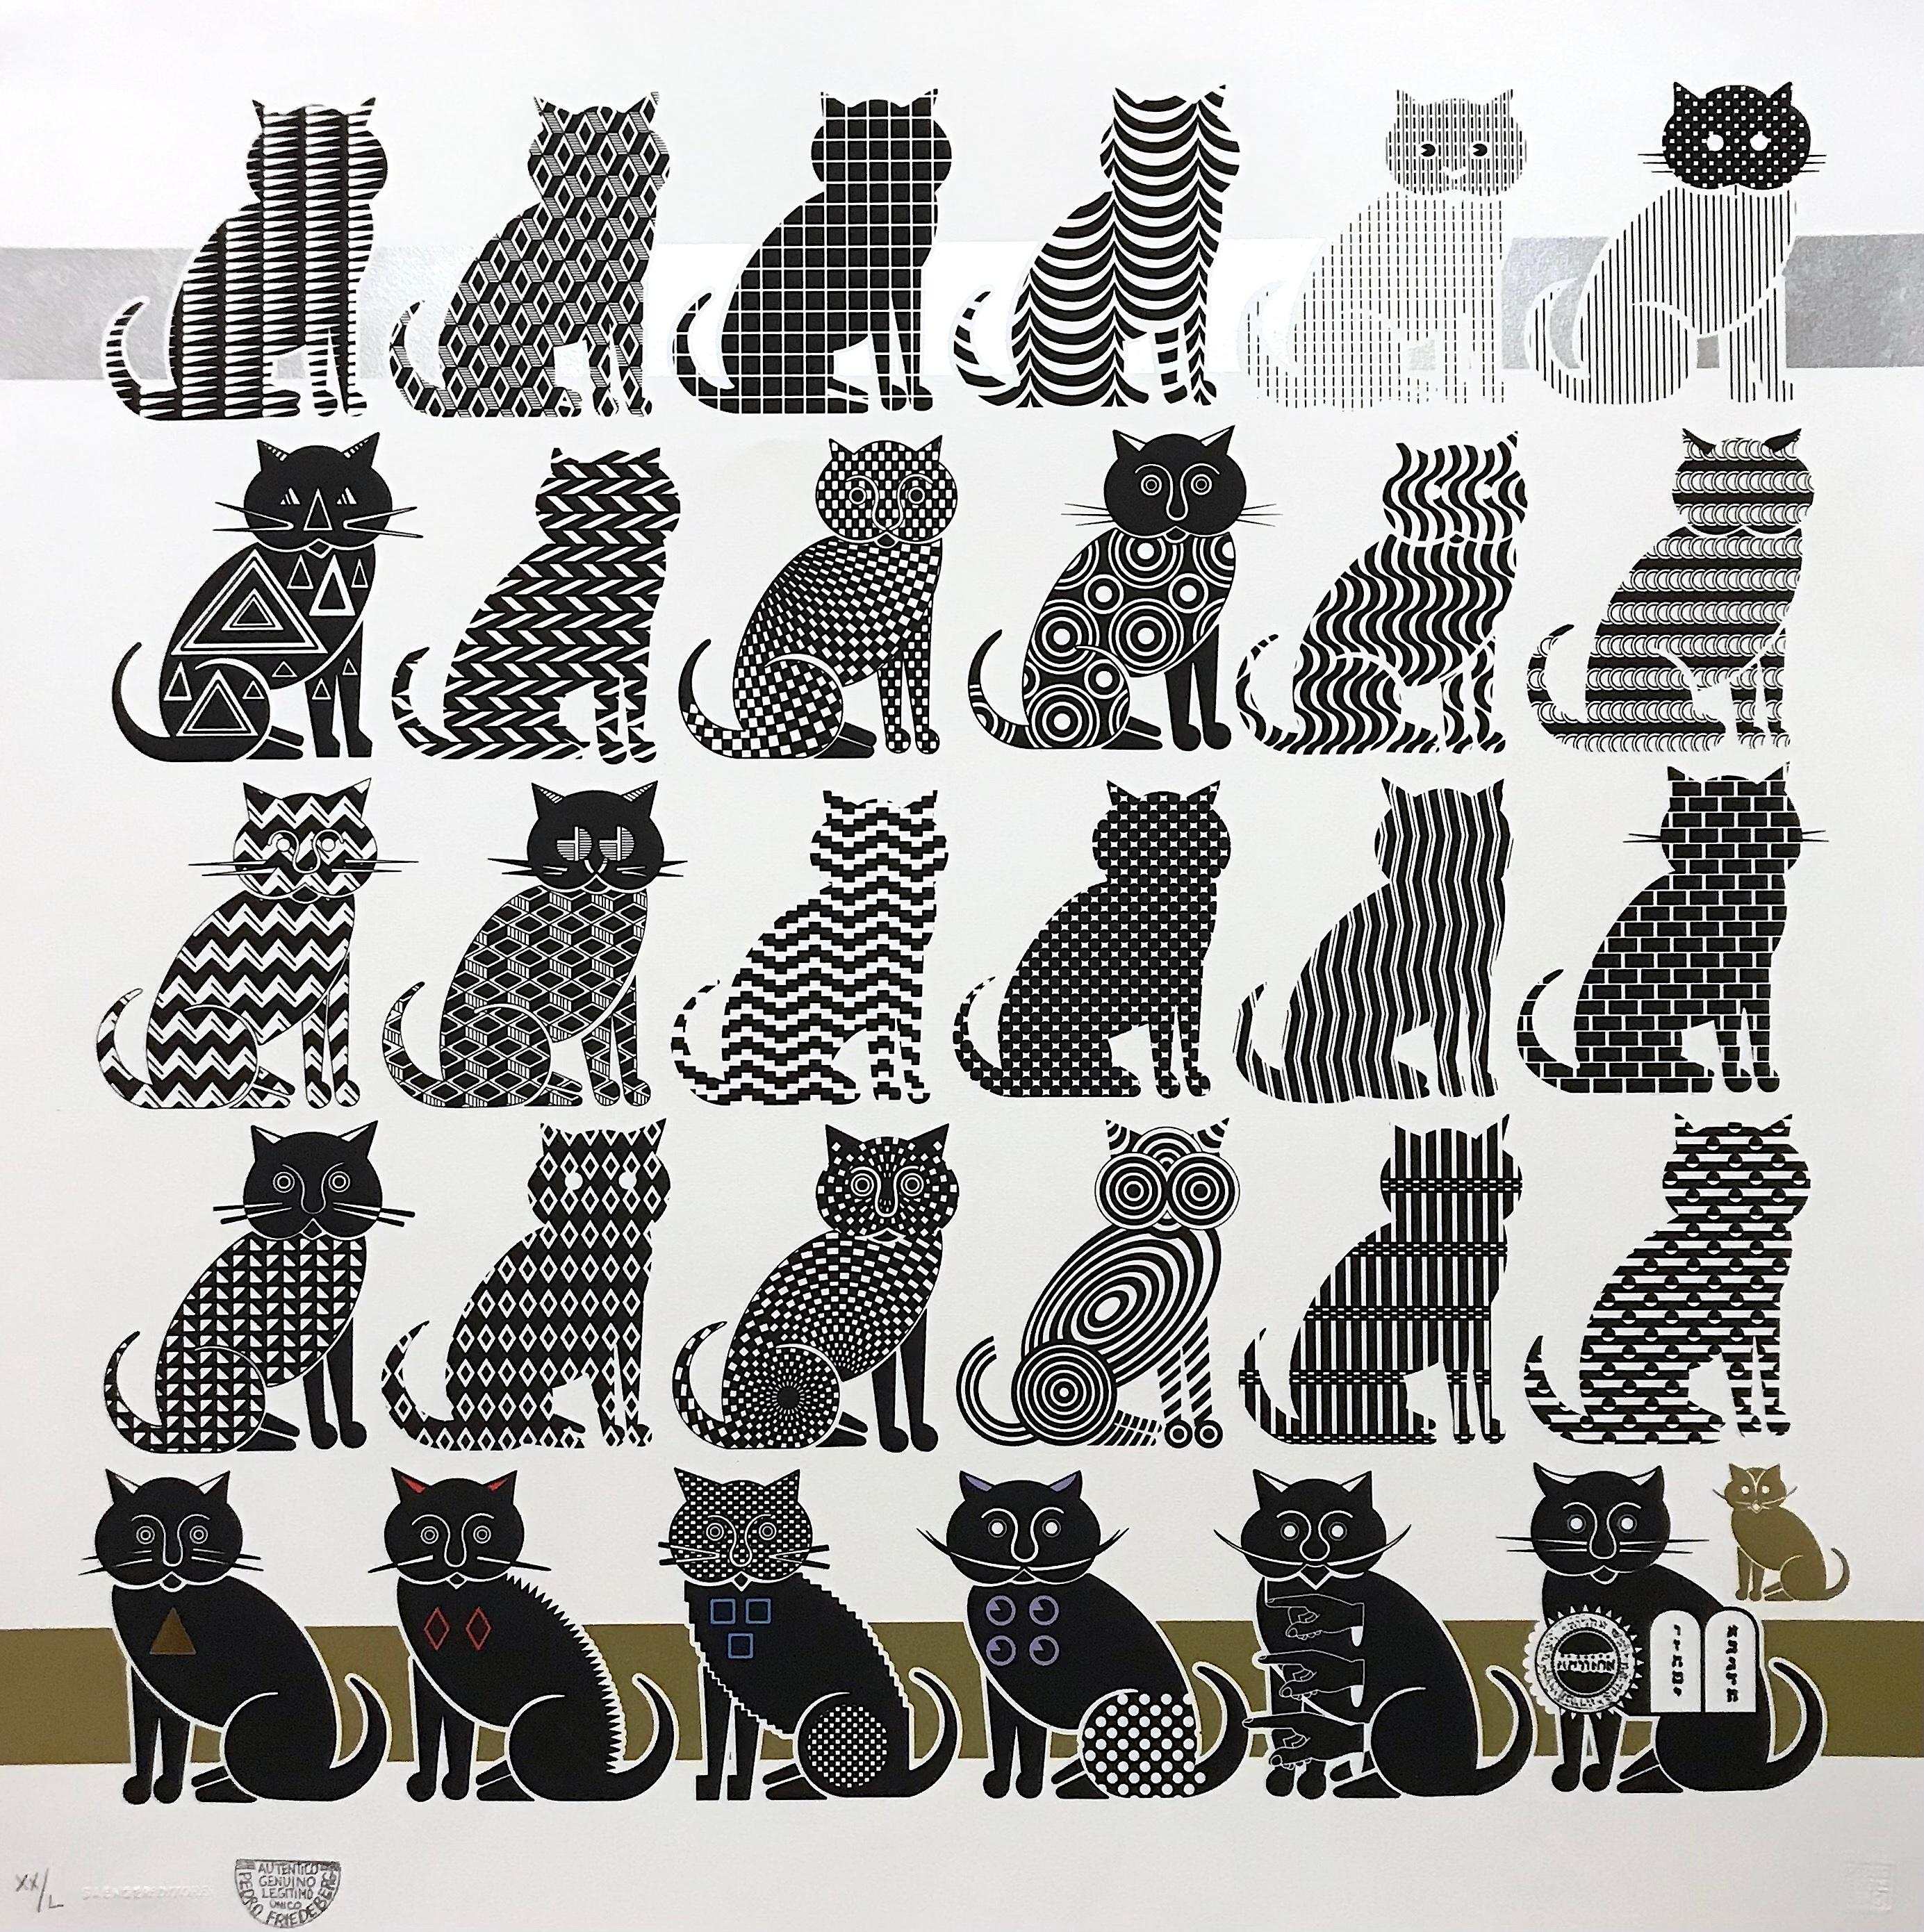 "Cats" - 2d surrealist print, black and white patterns, animals